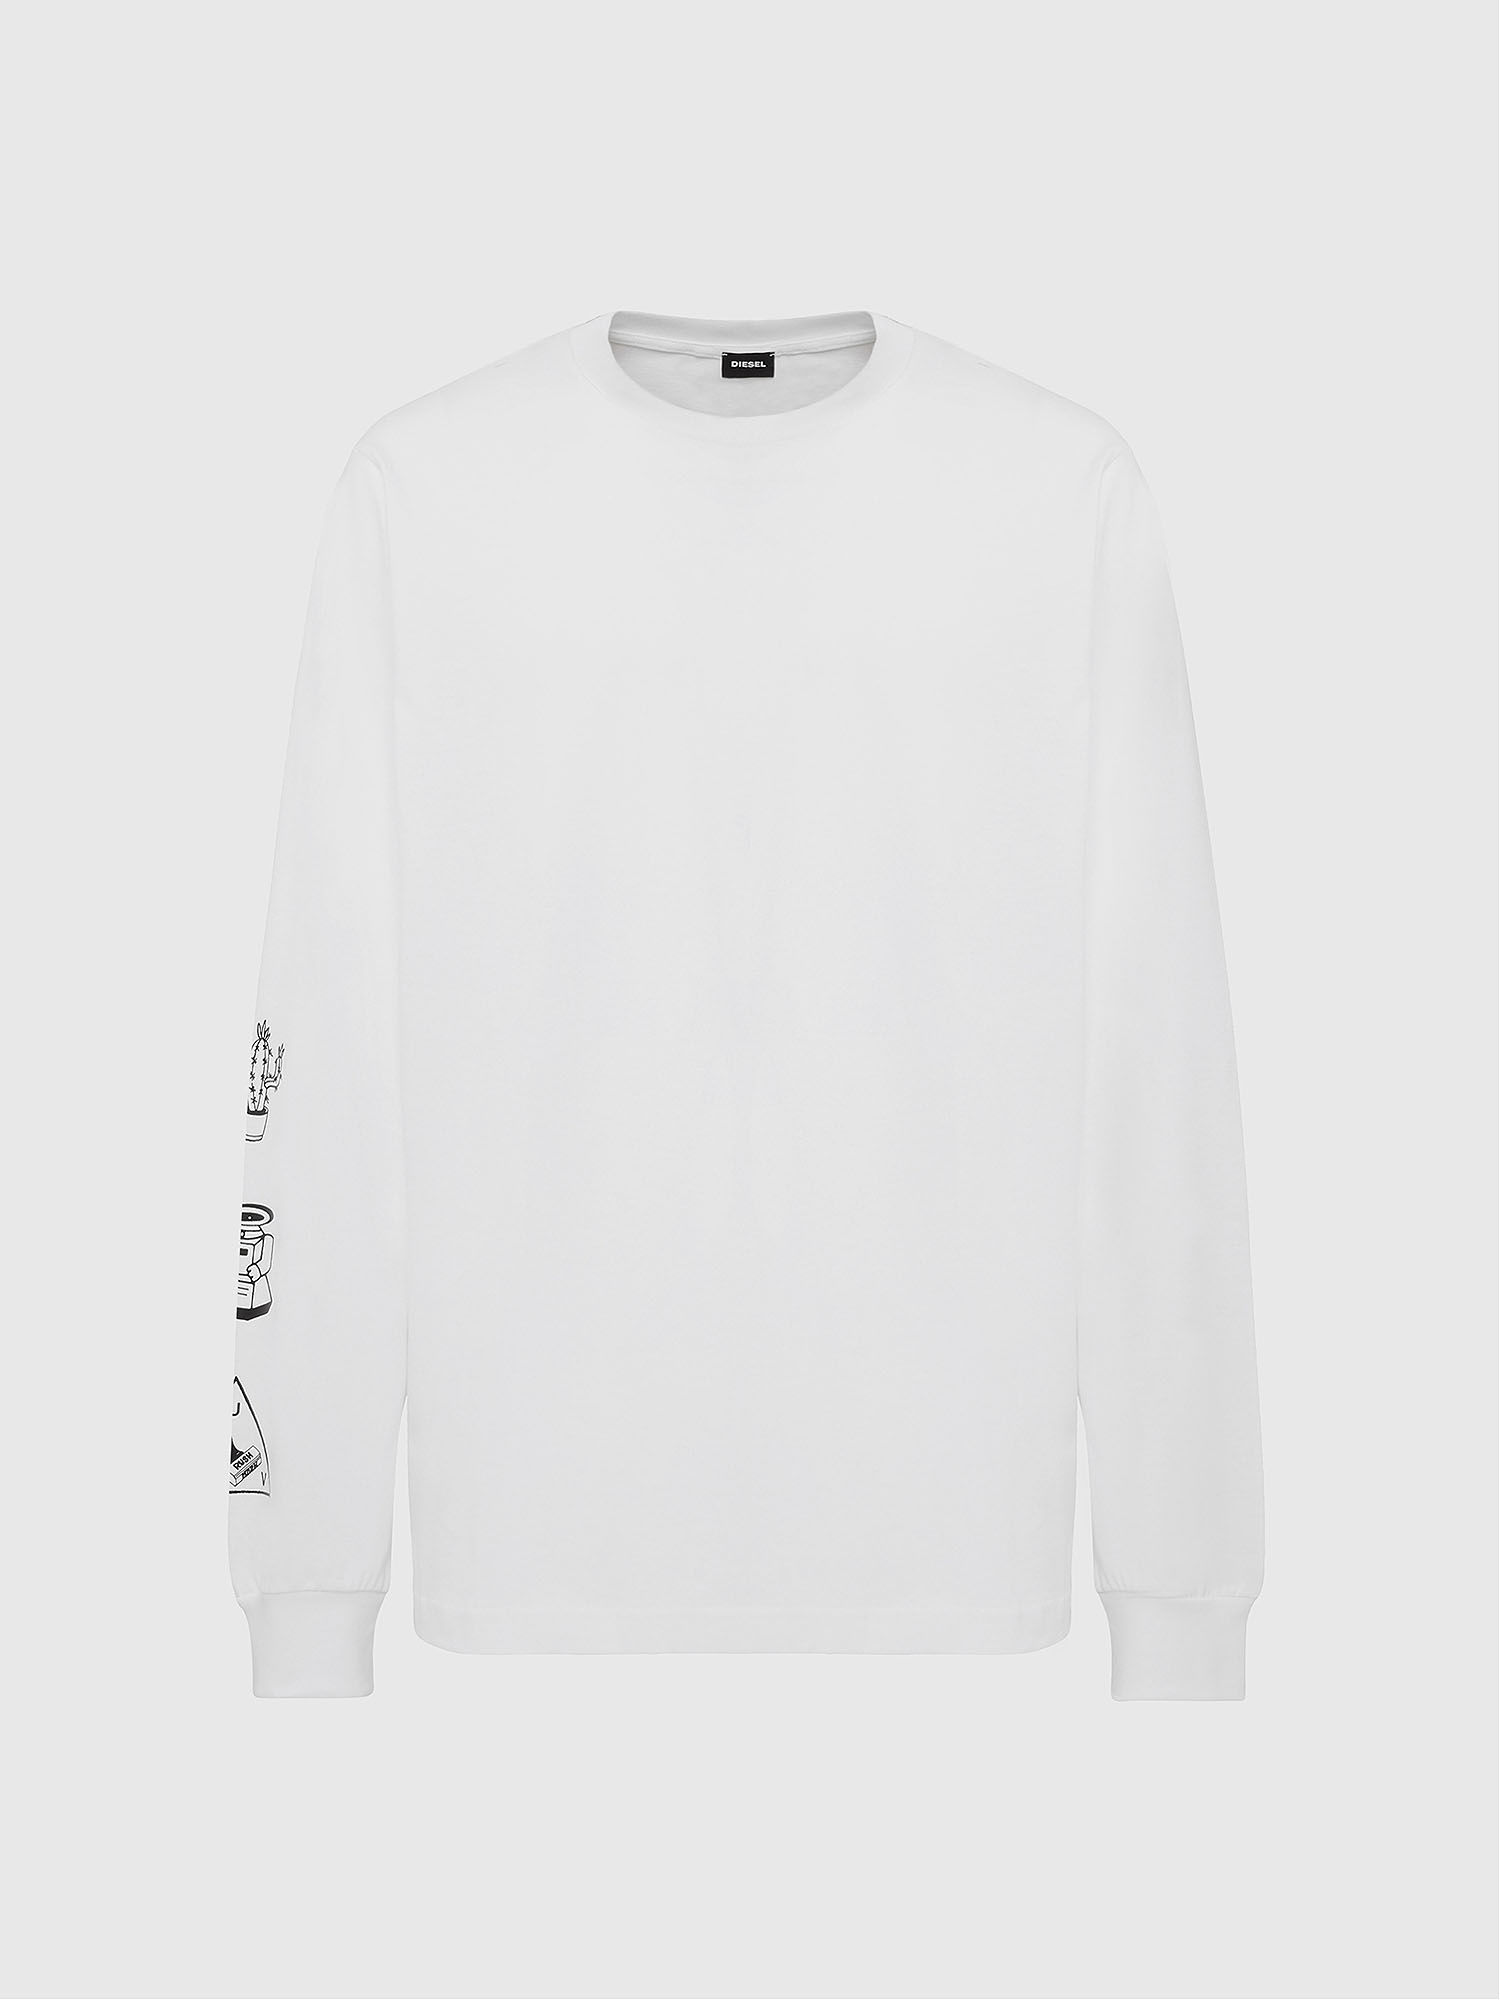 T-JUST-LS-X90 Man: Long-sleeve T-shirt with barcode logo | Diesel